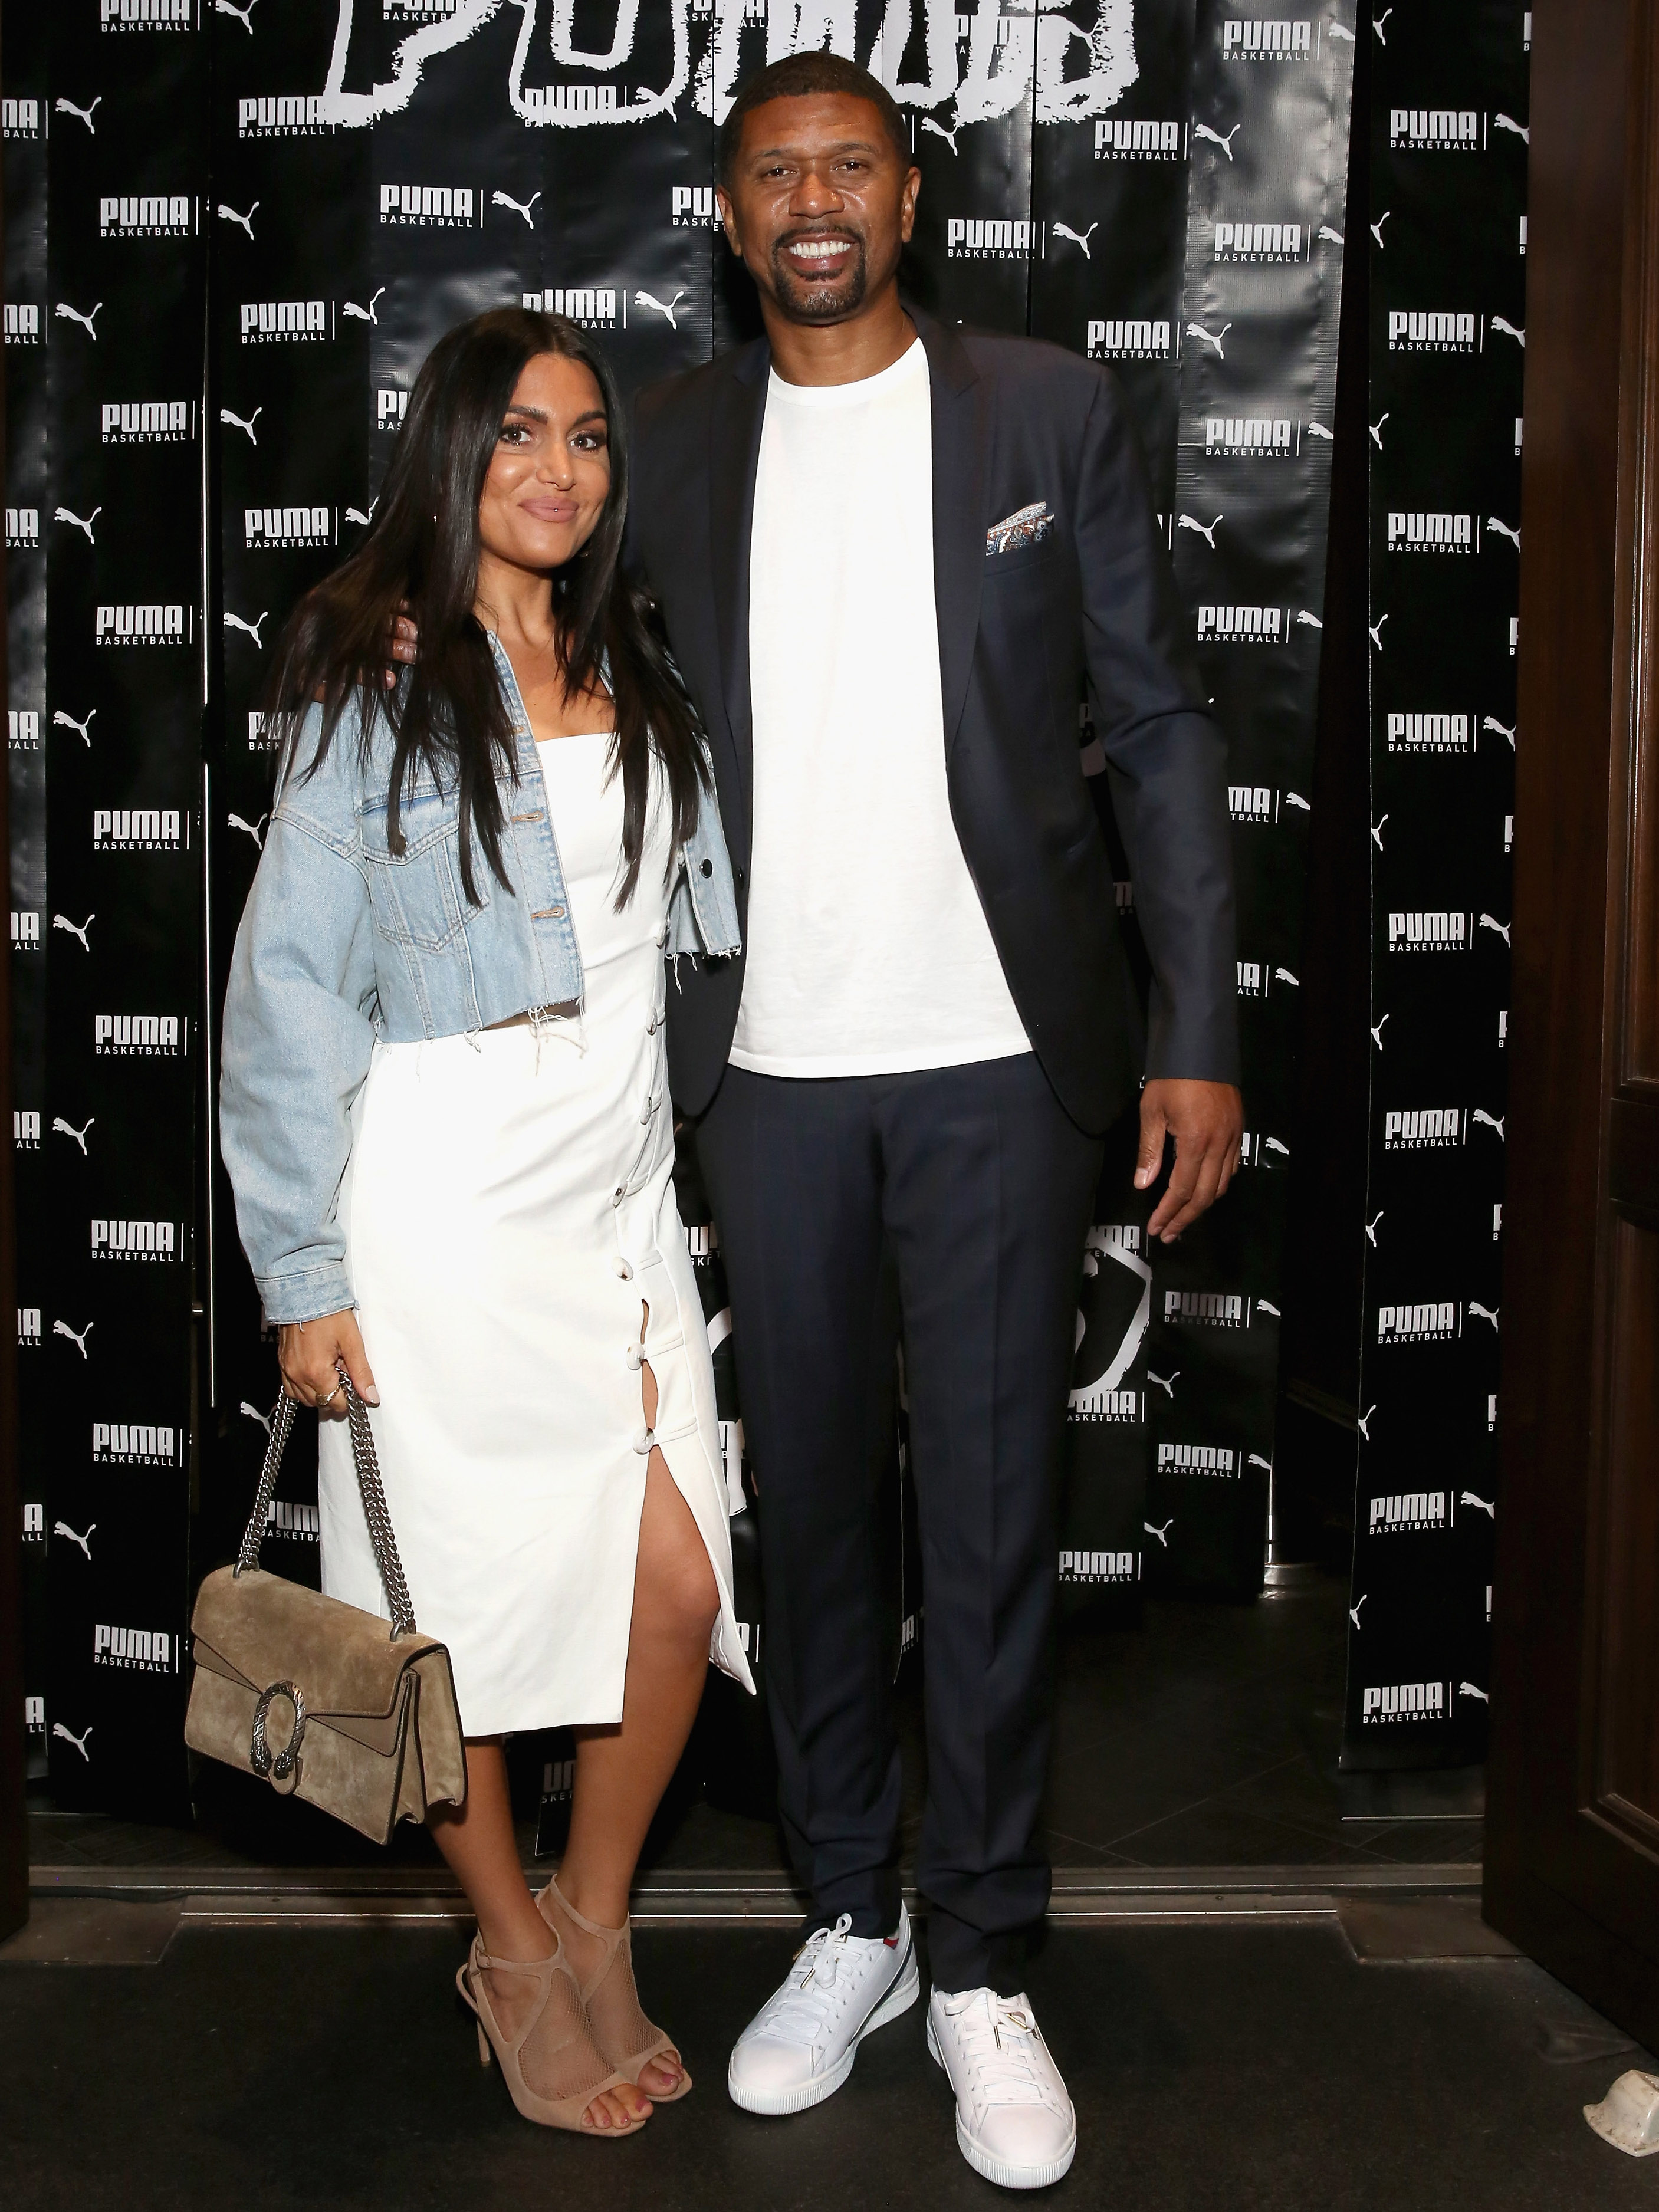 Jalen Rose opens up on Molly Qerim divorce and ‘laughable’ Stephen A